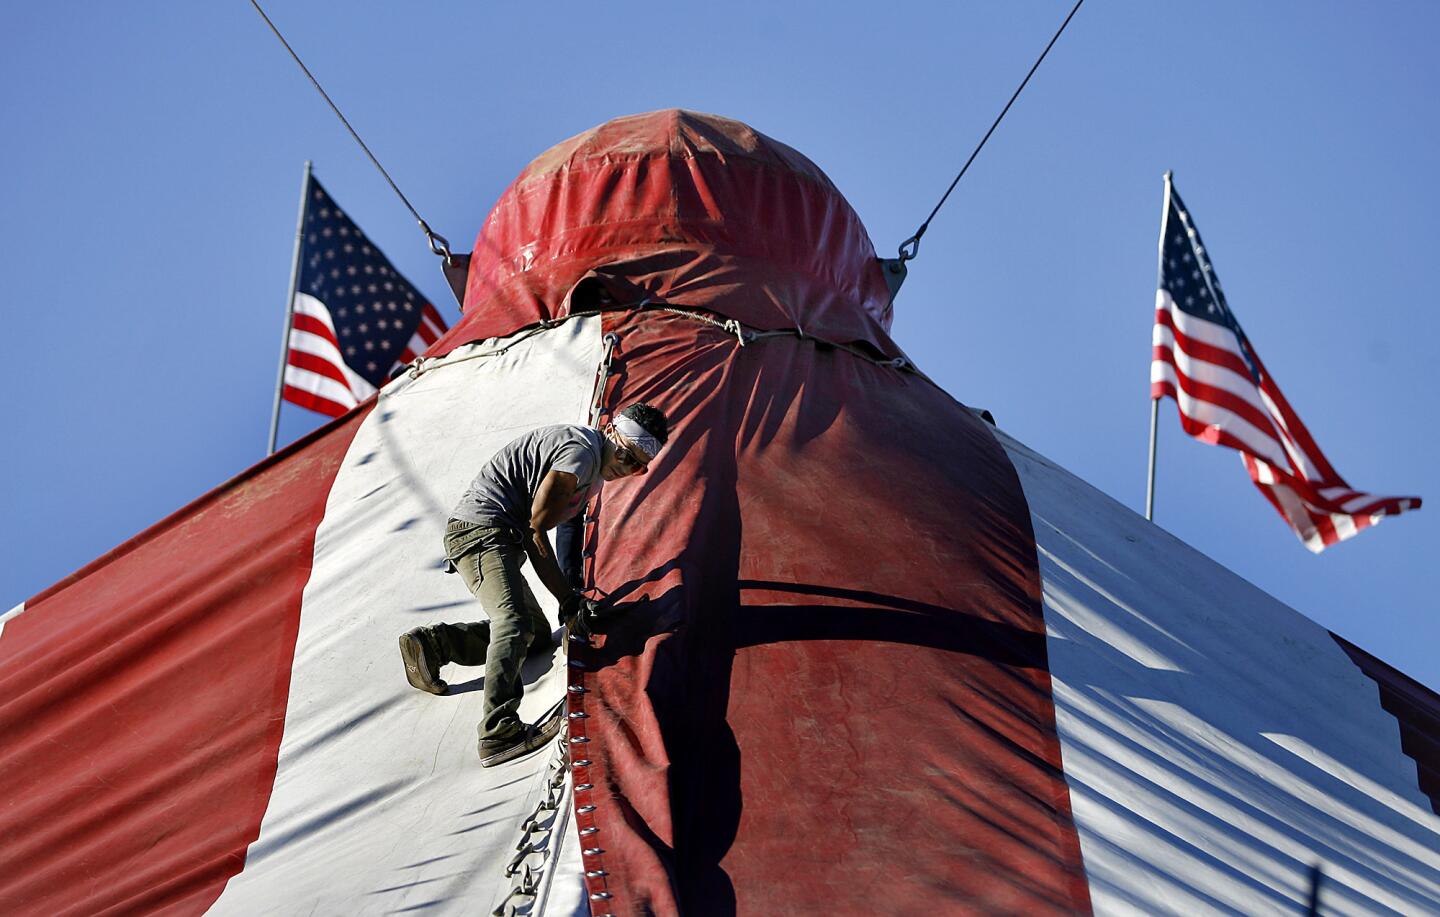 A circus performer ties together the top of the Ramos Circus tent on the Civic Center Auditorium's parking lot in Glendale on Tuesday, Nov. 20, 2012. The circus will be in town from Friday Nov. 23 tthrough Monday Dec. 3.